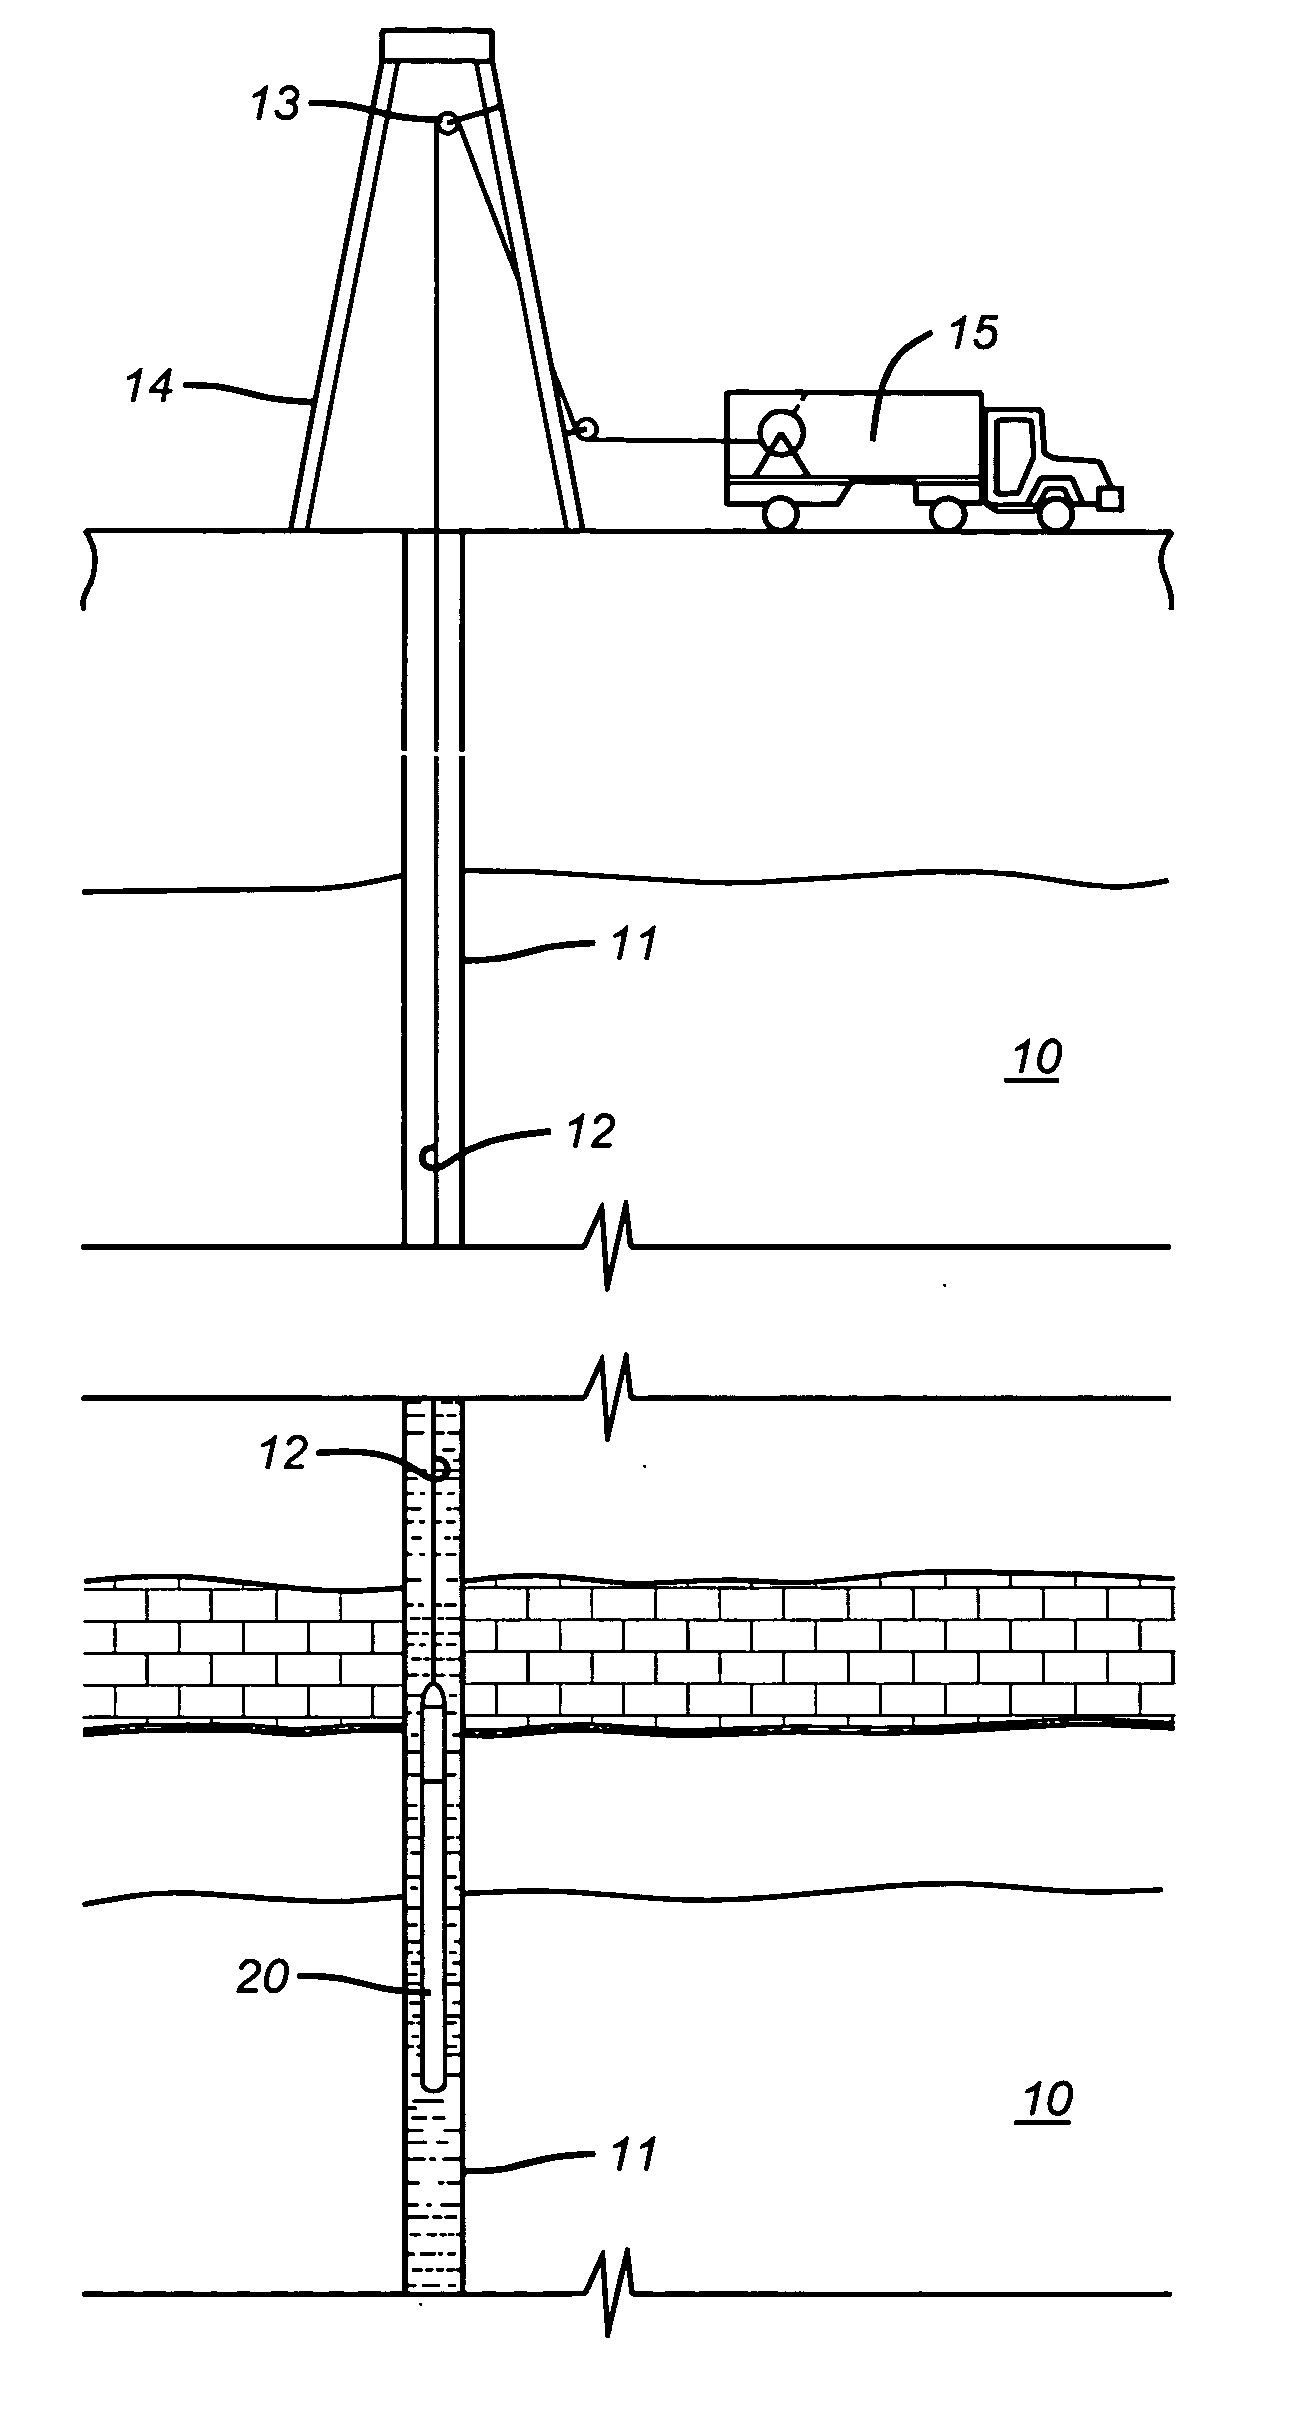 Method and apparatus for a continuous data recorder for a downhole sample tank